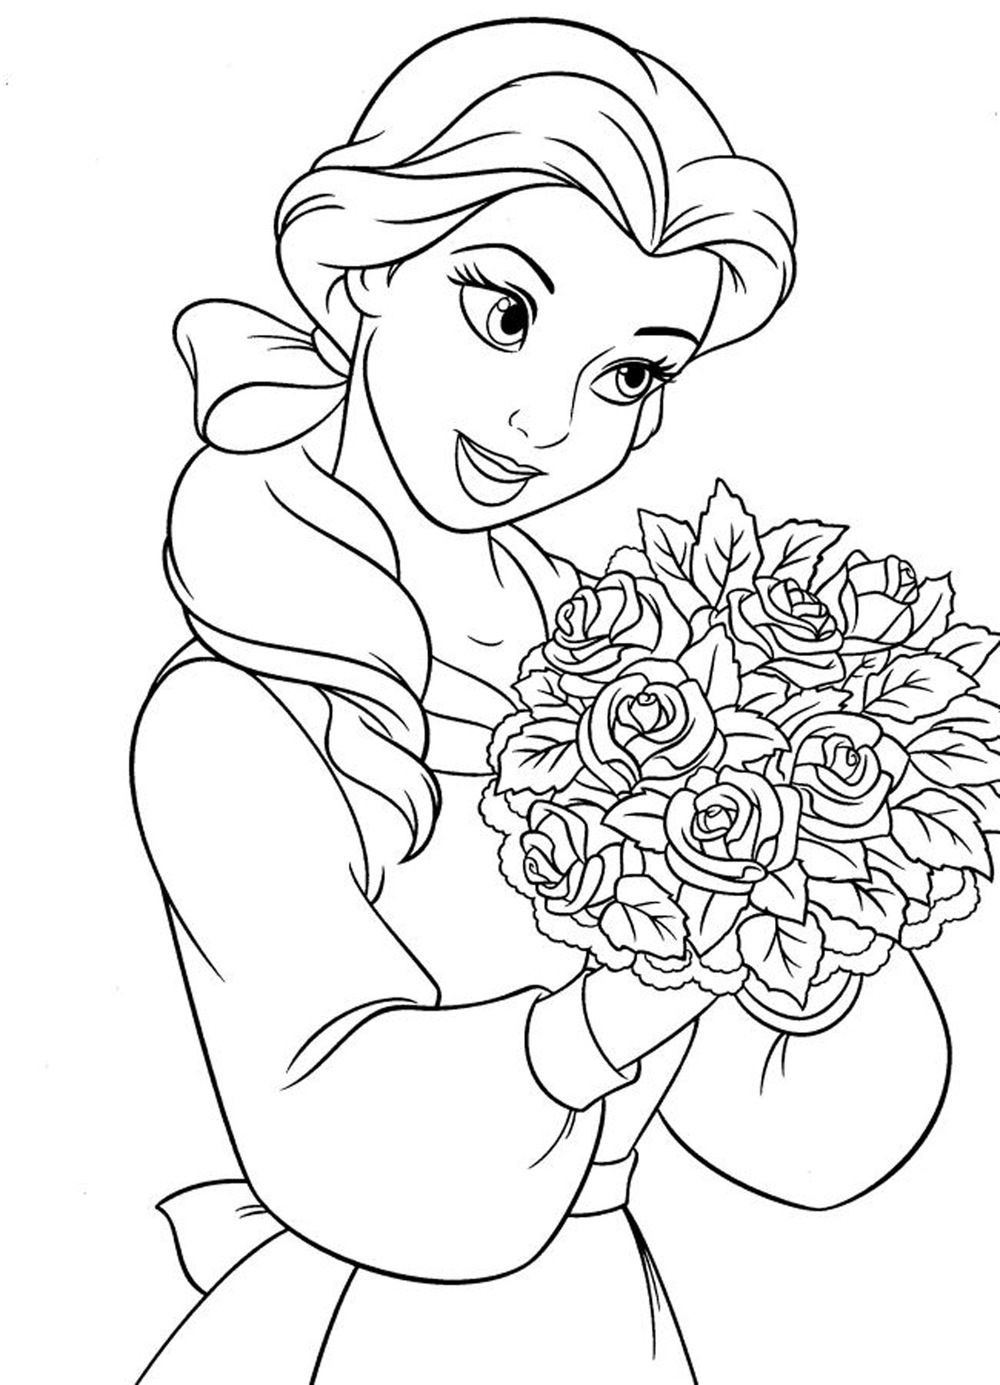 Coloring Pages For Girls Mouted Princess
 princess coloring pages for girls Free